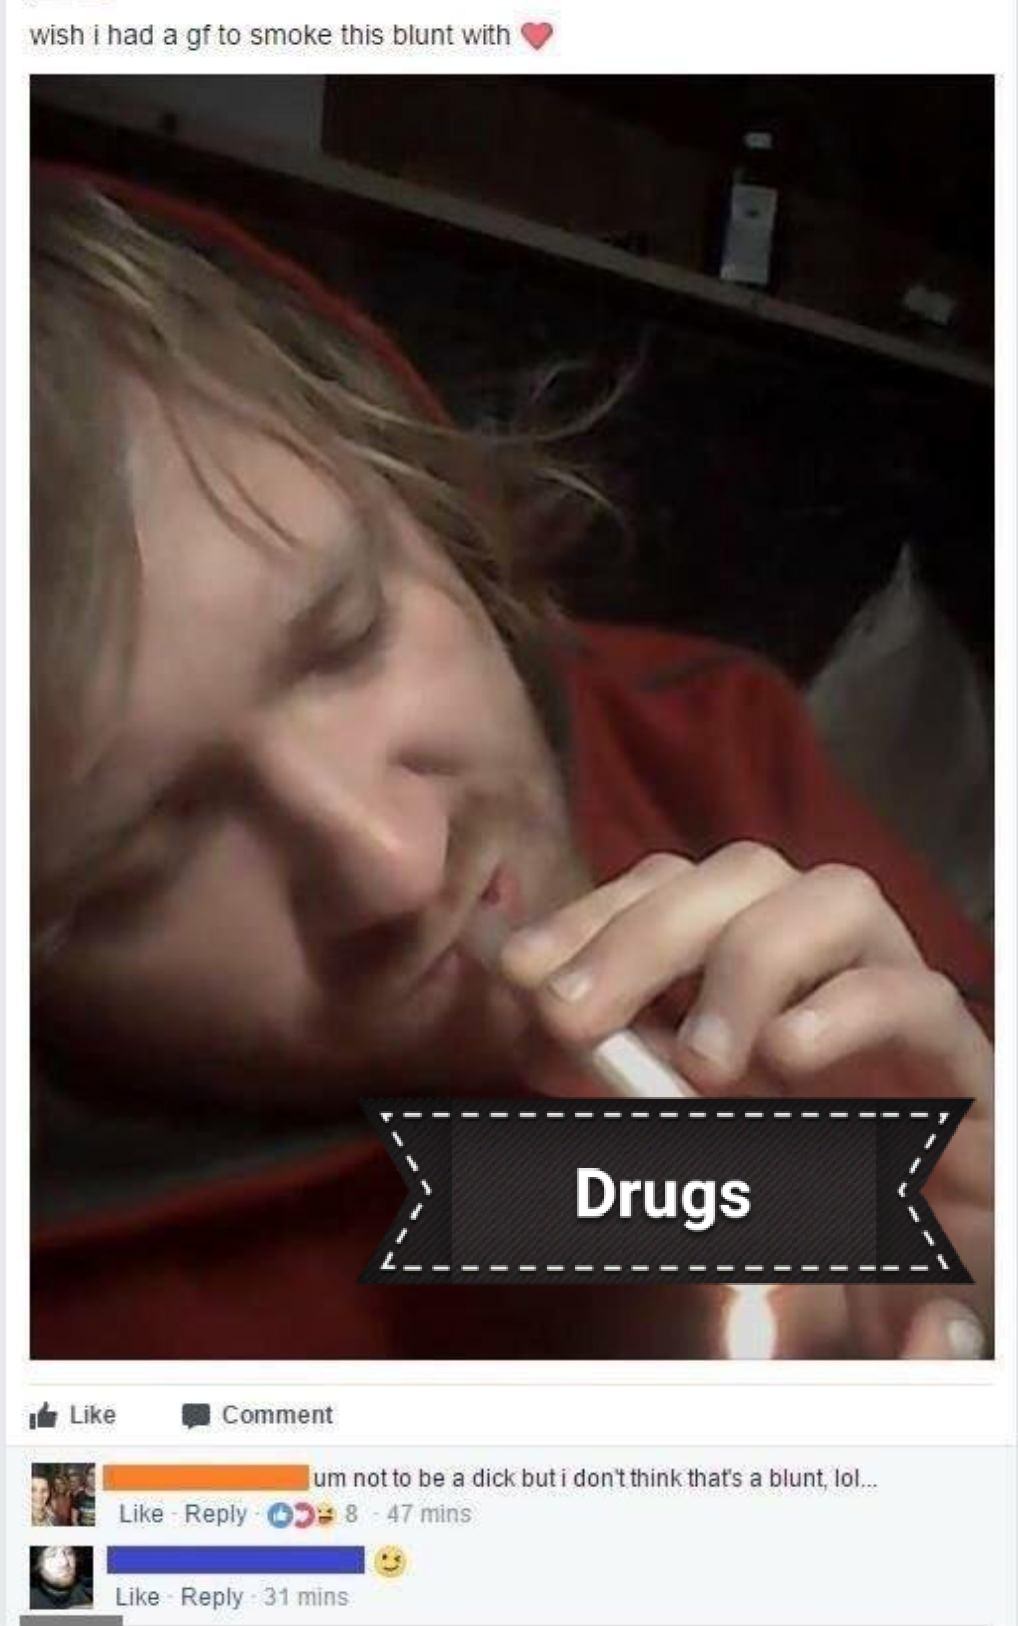 cringe photo caption - wish i had a gf to smoke this blunt with Drugs Comment E um not to be a dick but i don't think that's a blunt, lol... 8 47 mins 31 mins